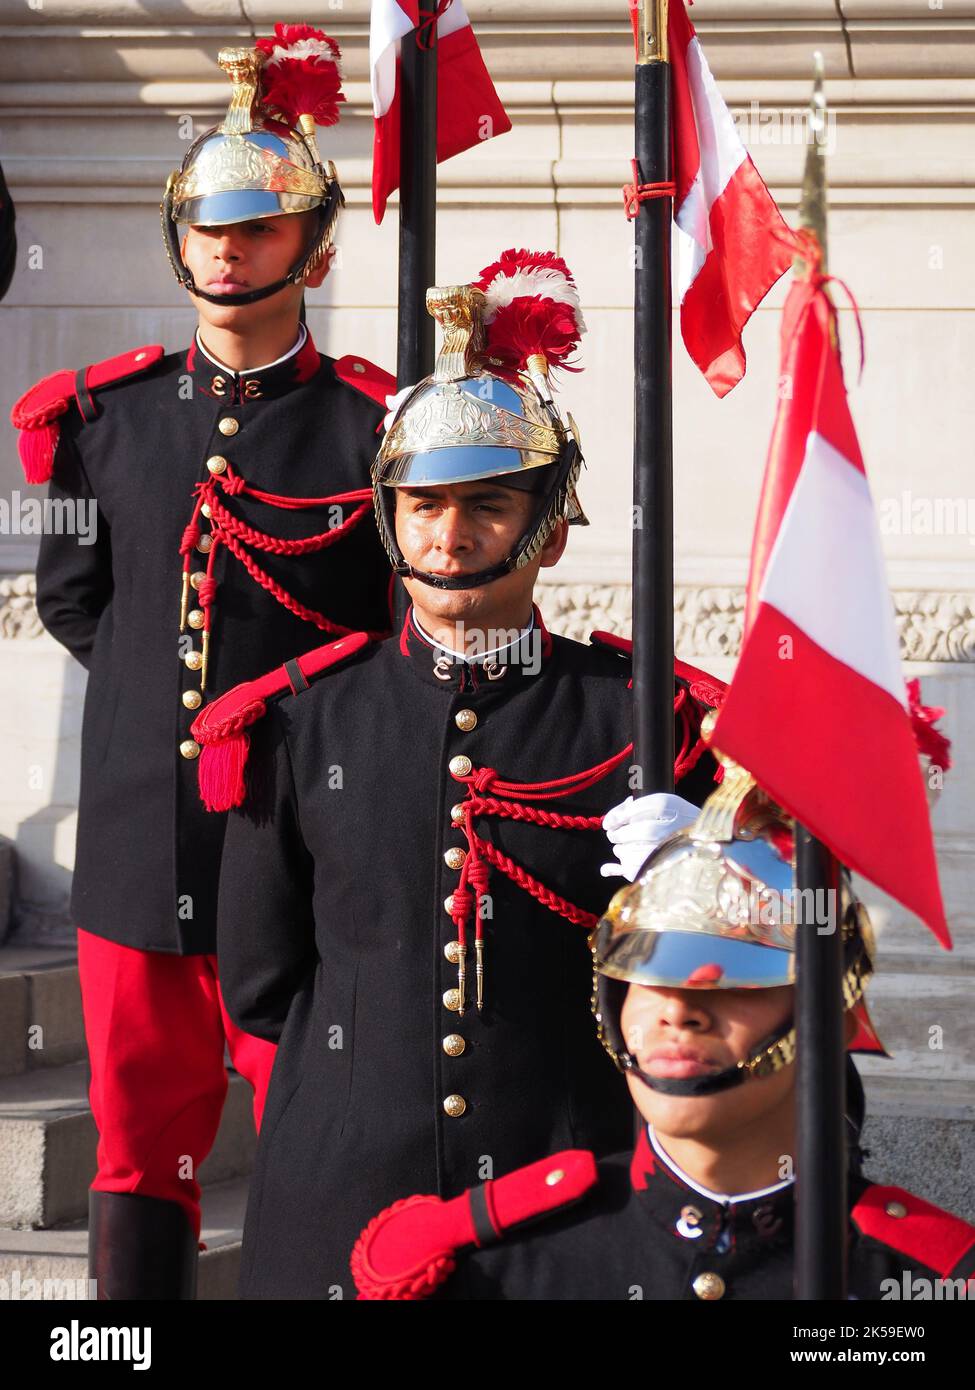 Lima, Peru, 06/10/2022, Honor guard at the facade of the Government Palace of Peru during the visit of the United States Secretary Antony Blinken on the framework of the OAS General Assembly taking place in Lima, Peru, from October 5 to 7, 2022. Stock Photo